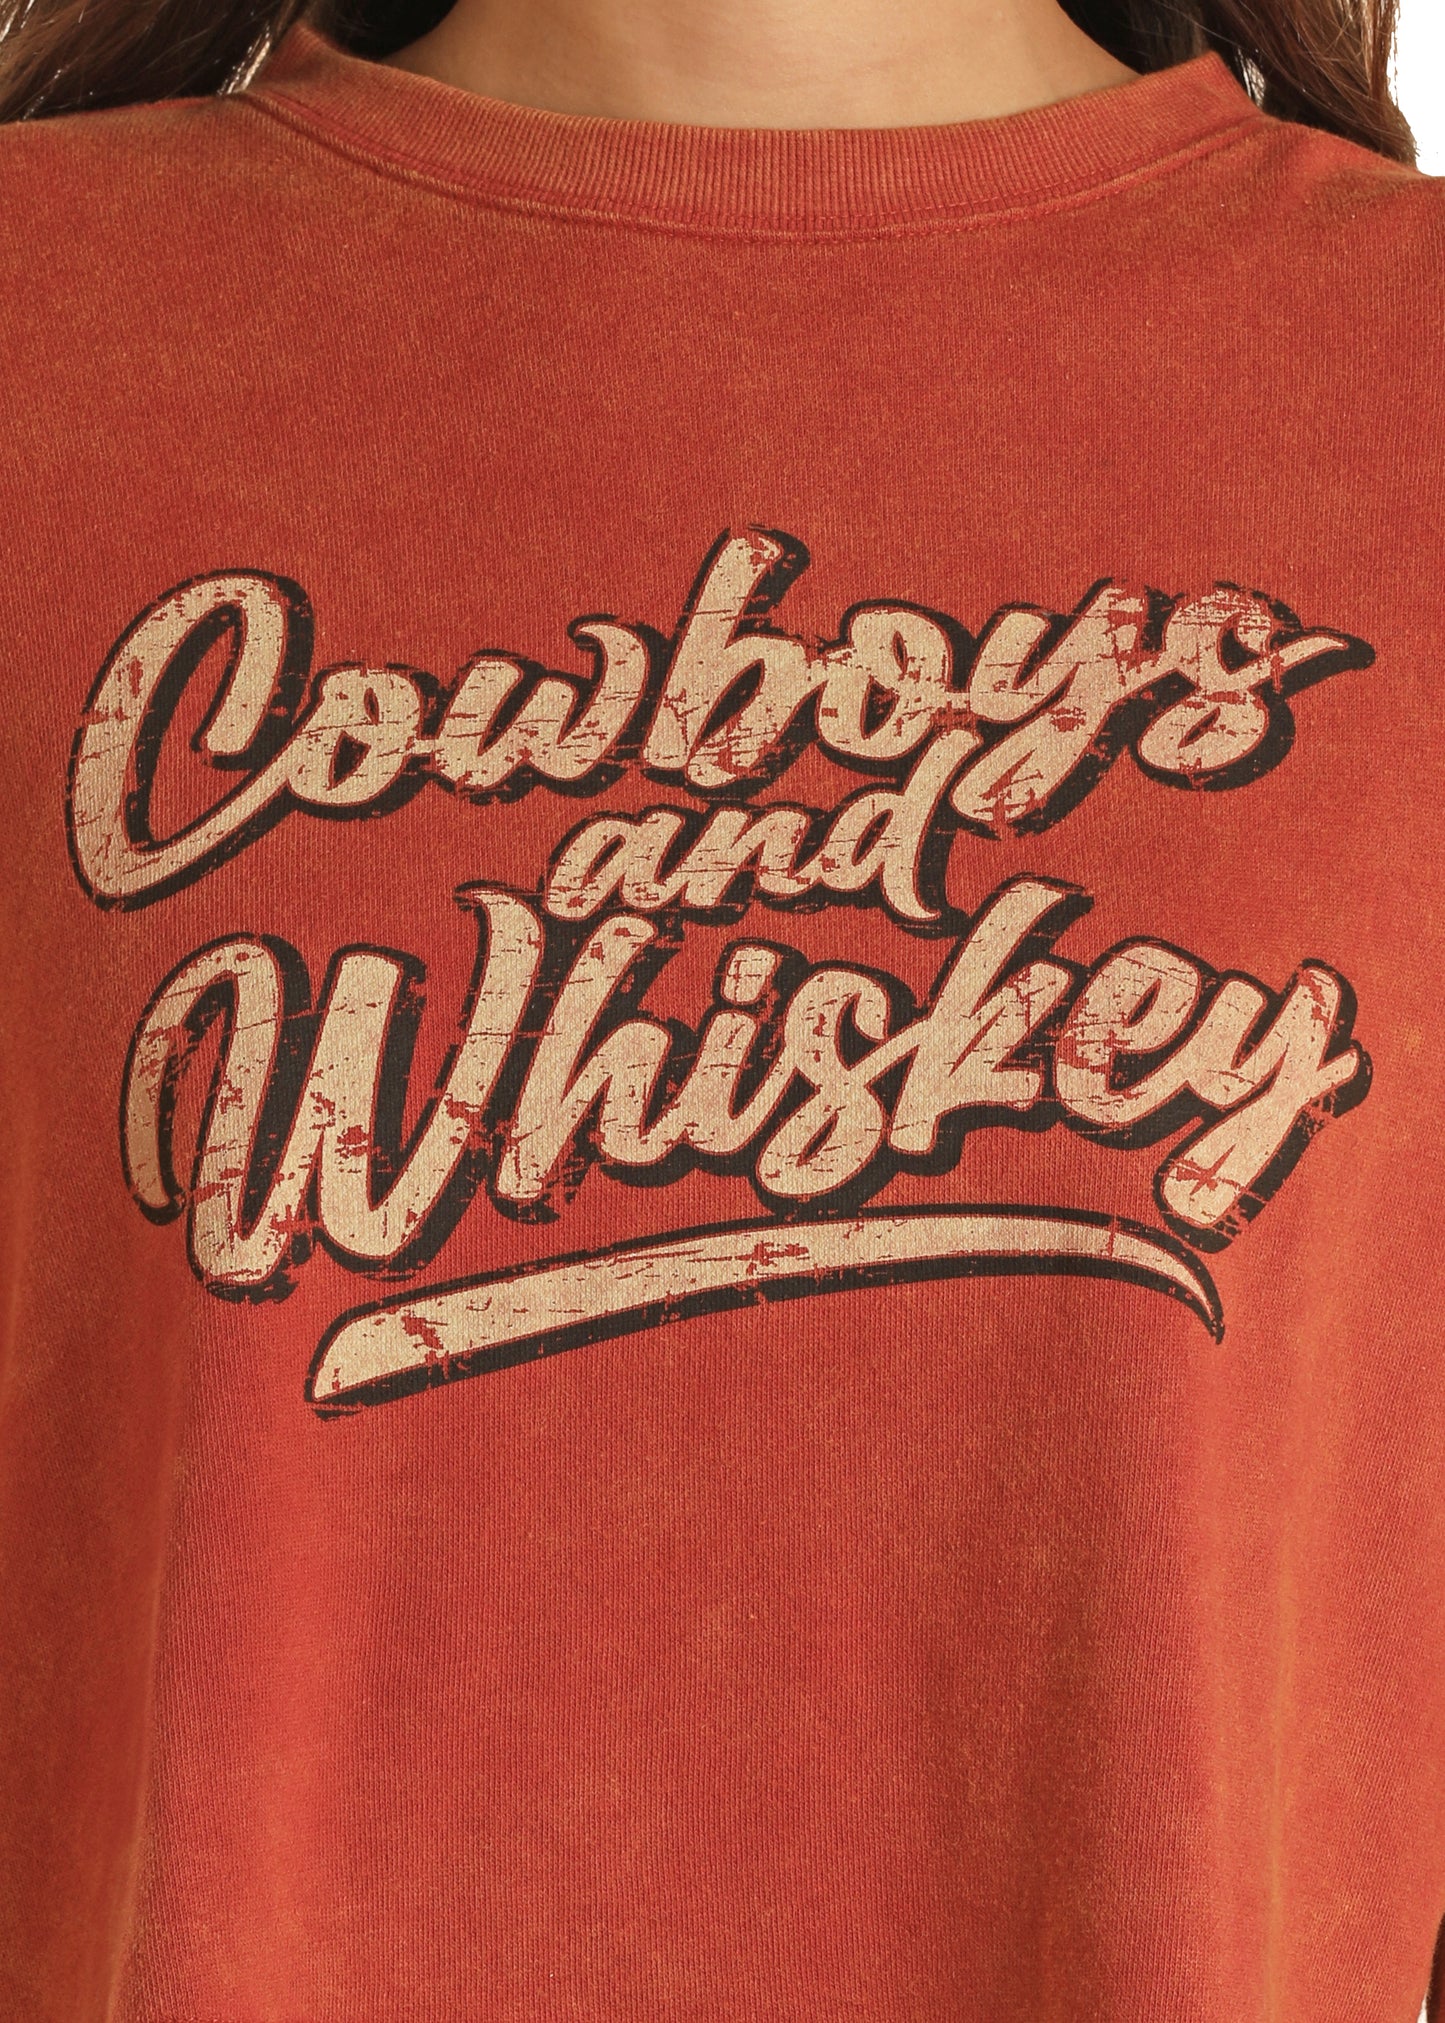 R&R Brick “Cowboys and Whiskey” Cropped